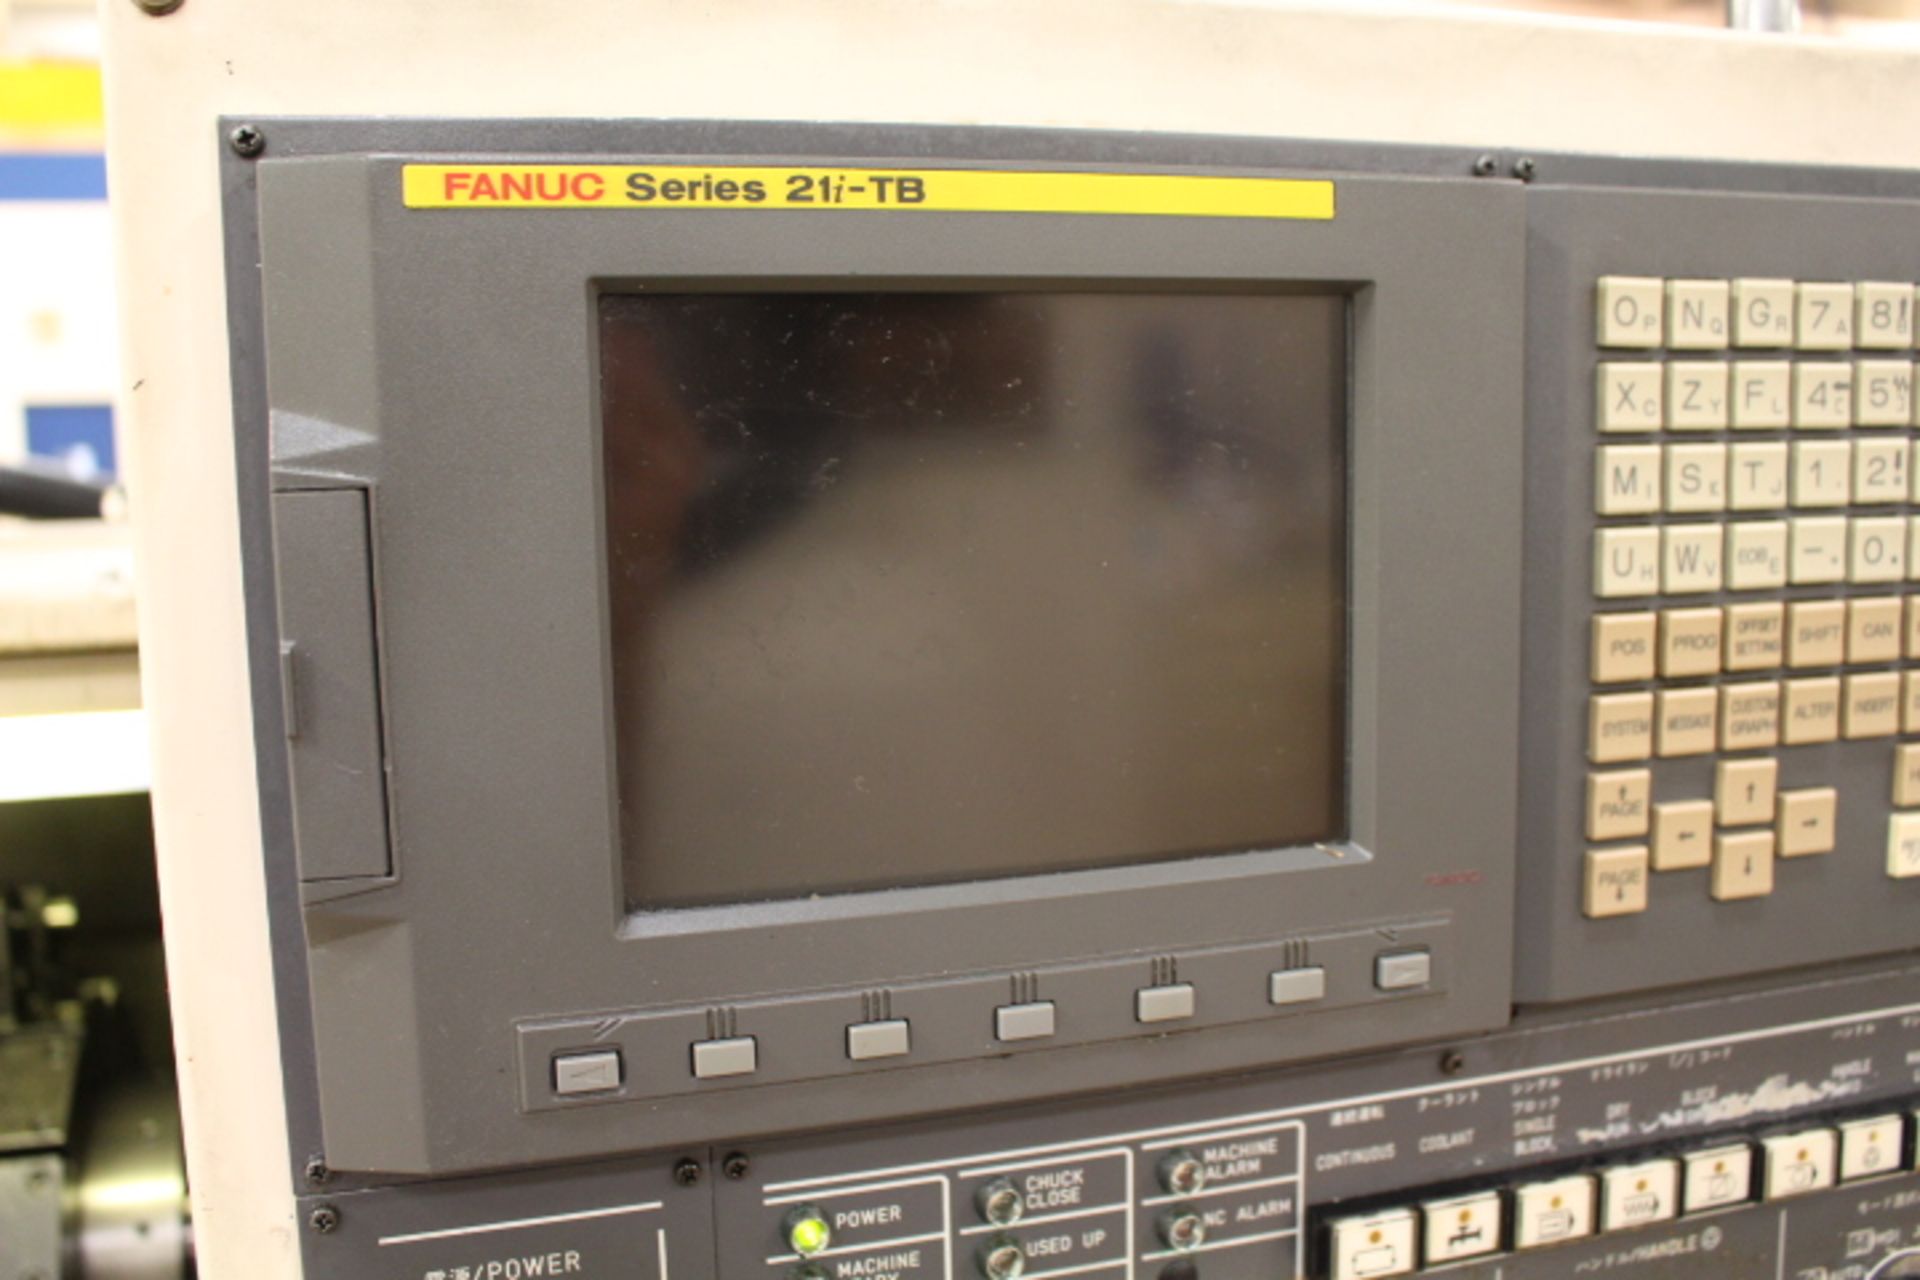 MIYANO BND-42T5 CNC TURNING CENTER, FANUC SERIES 21i-TB CONTROL, 5,000 RPM MAX SPINDLE SPEED, 12MM- - Image 5 of 21